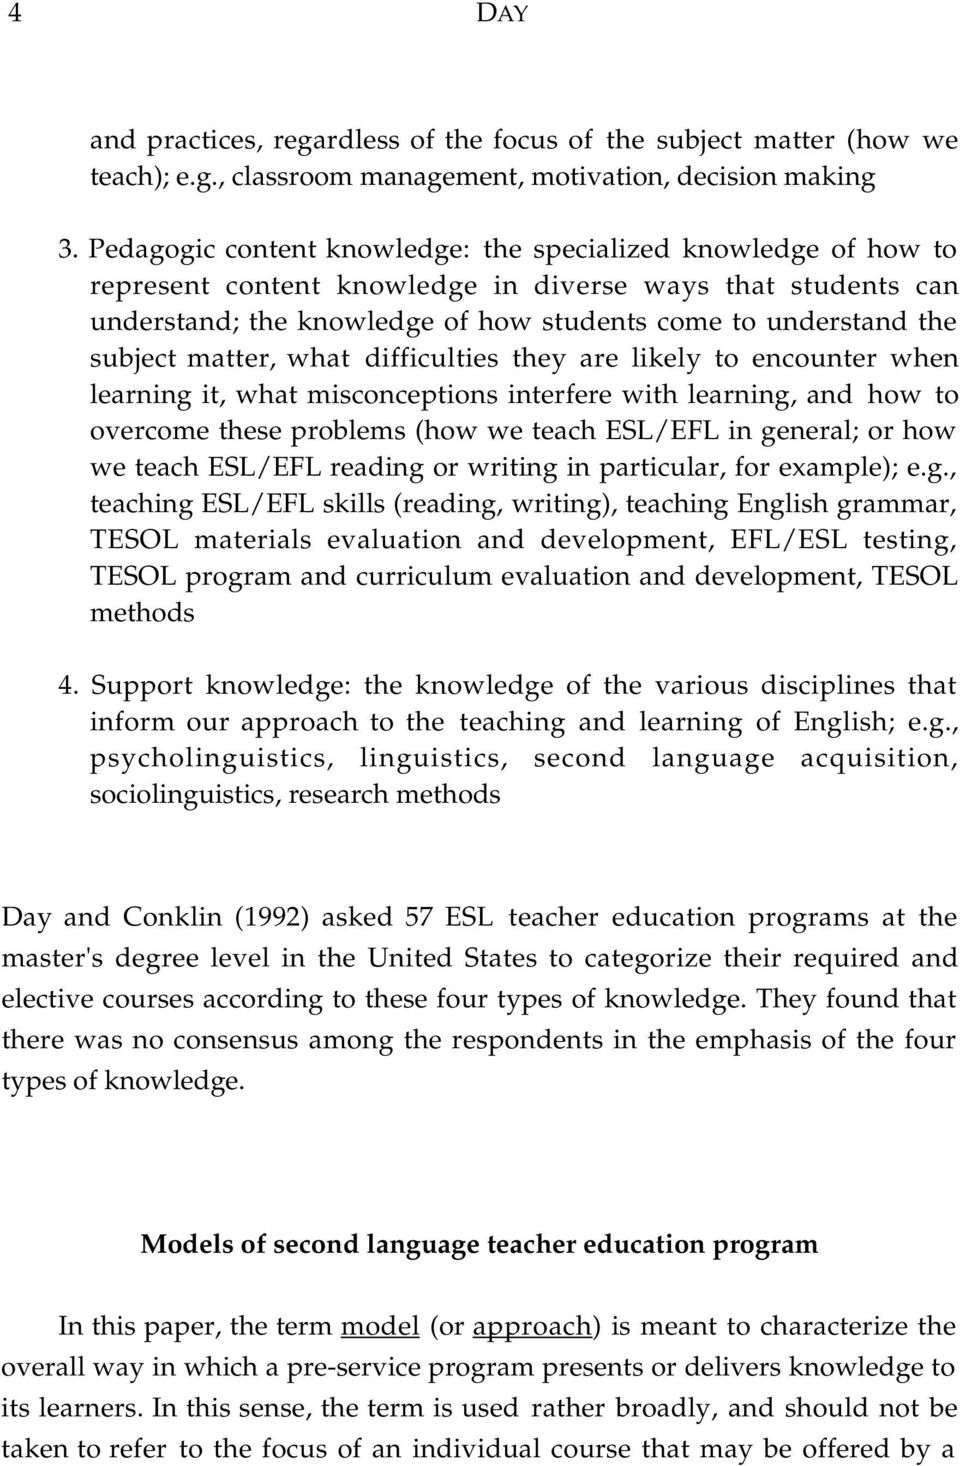 matter, what difficulties they are likely to encounter when learning it, what misconceptions interfere with learning, and how to overcome these problems (how we teach ESL/EFL in general; or how we